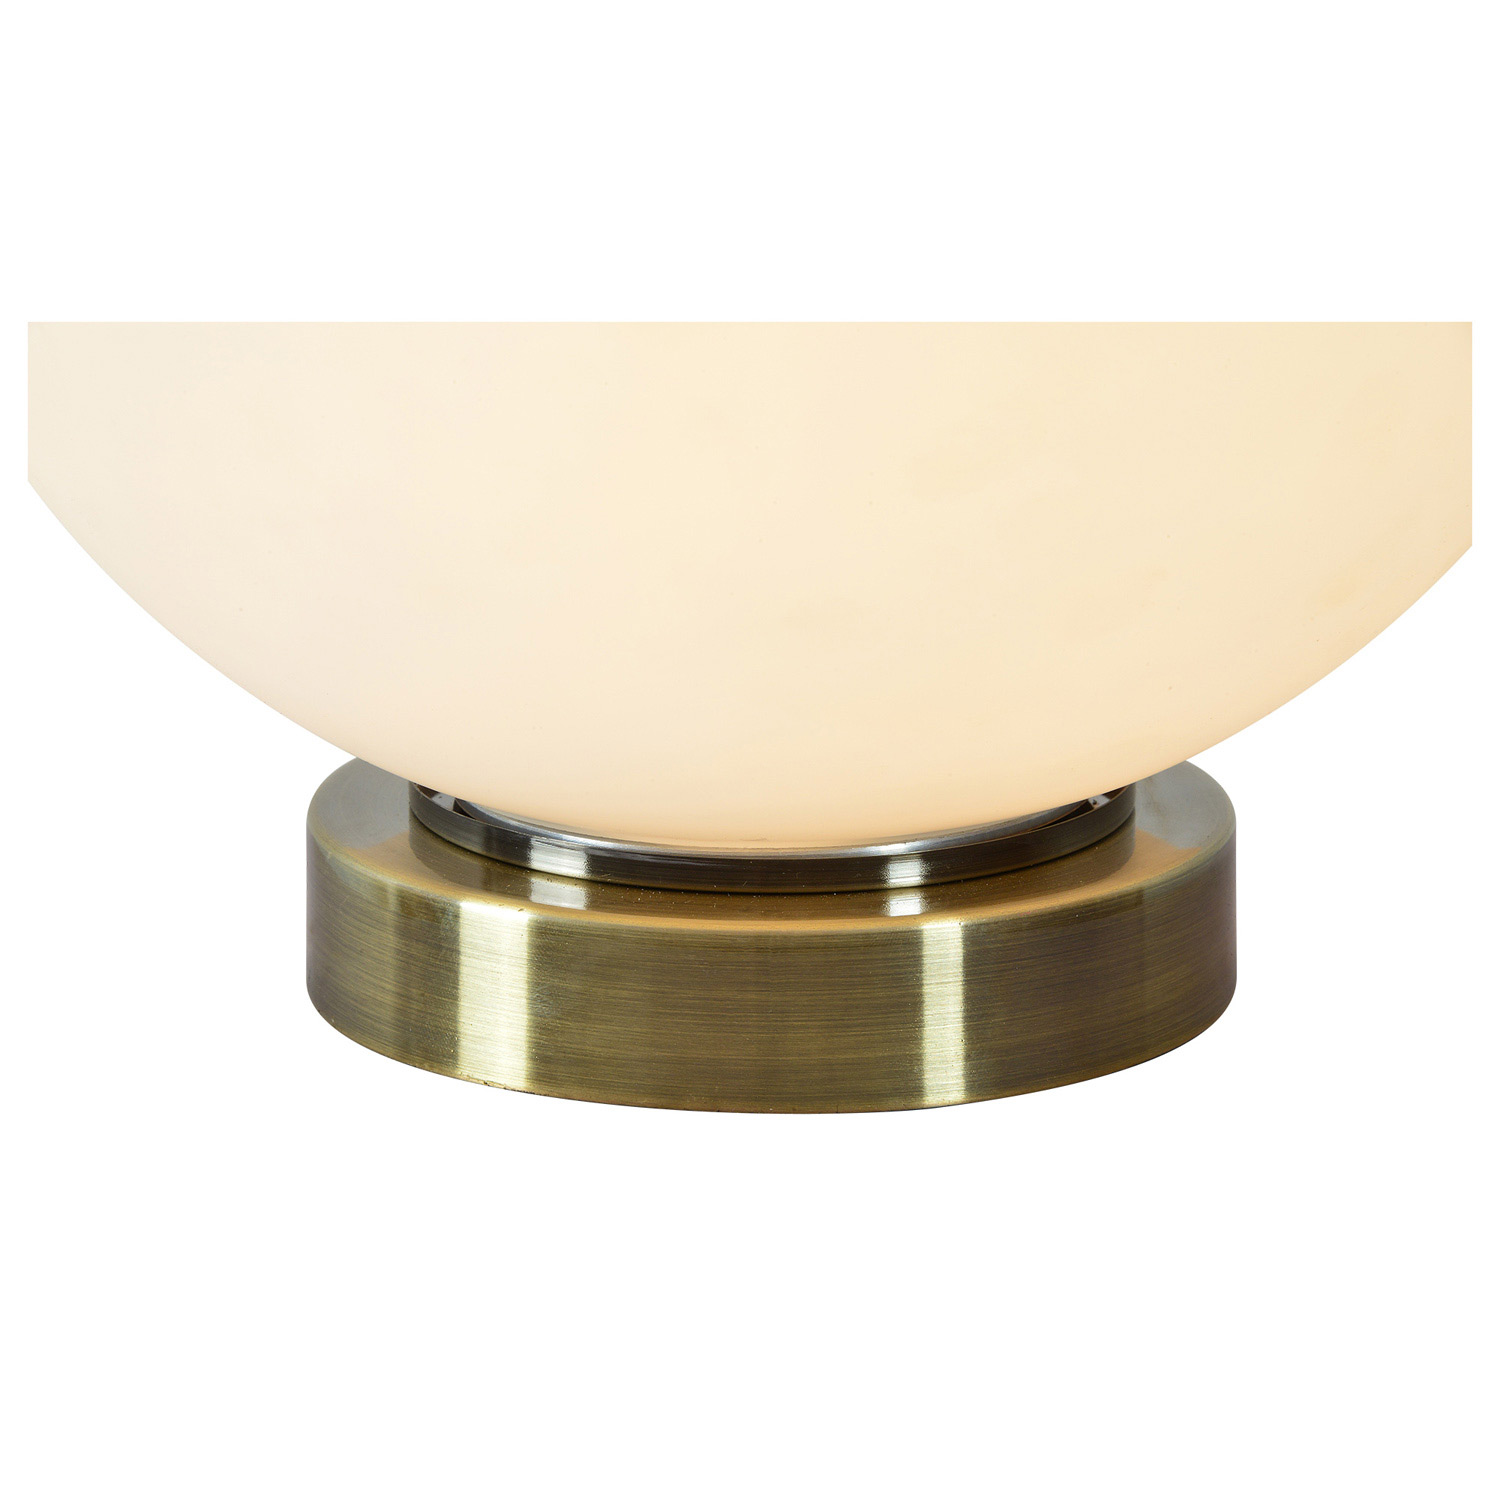 Ren-Wil Maxwell Table Lamp - Antique Brushed Brass